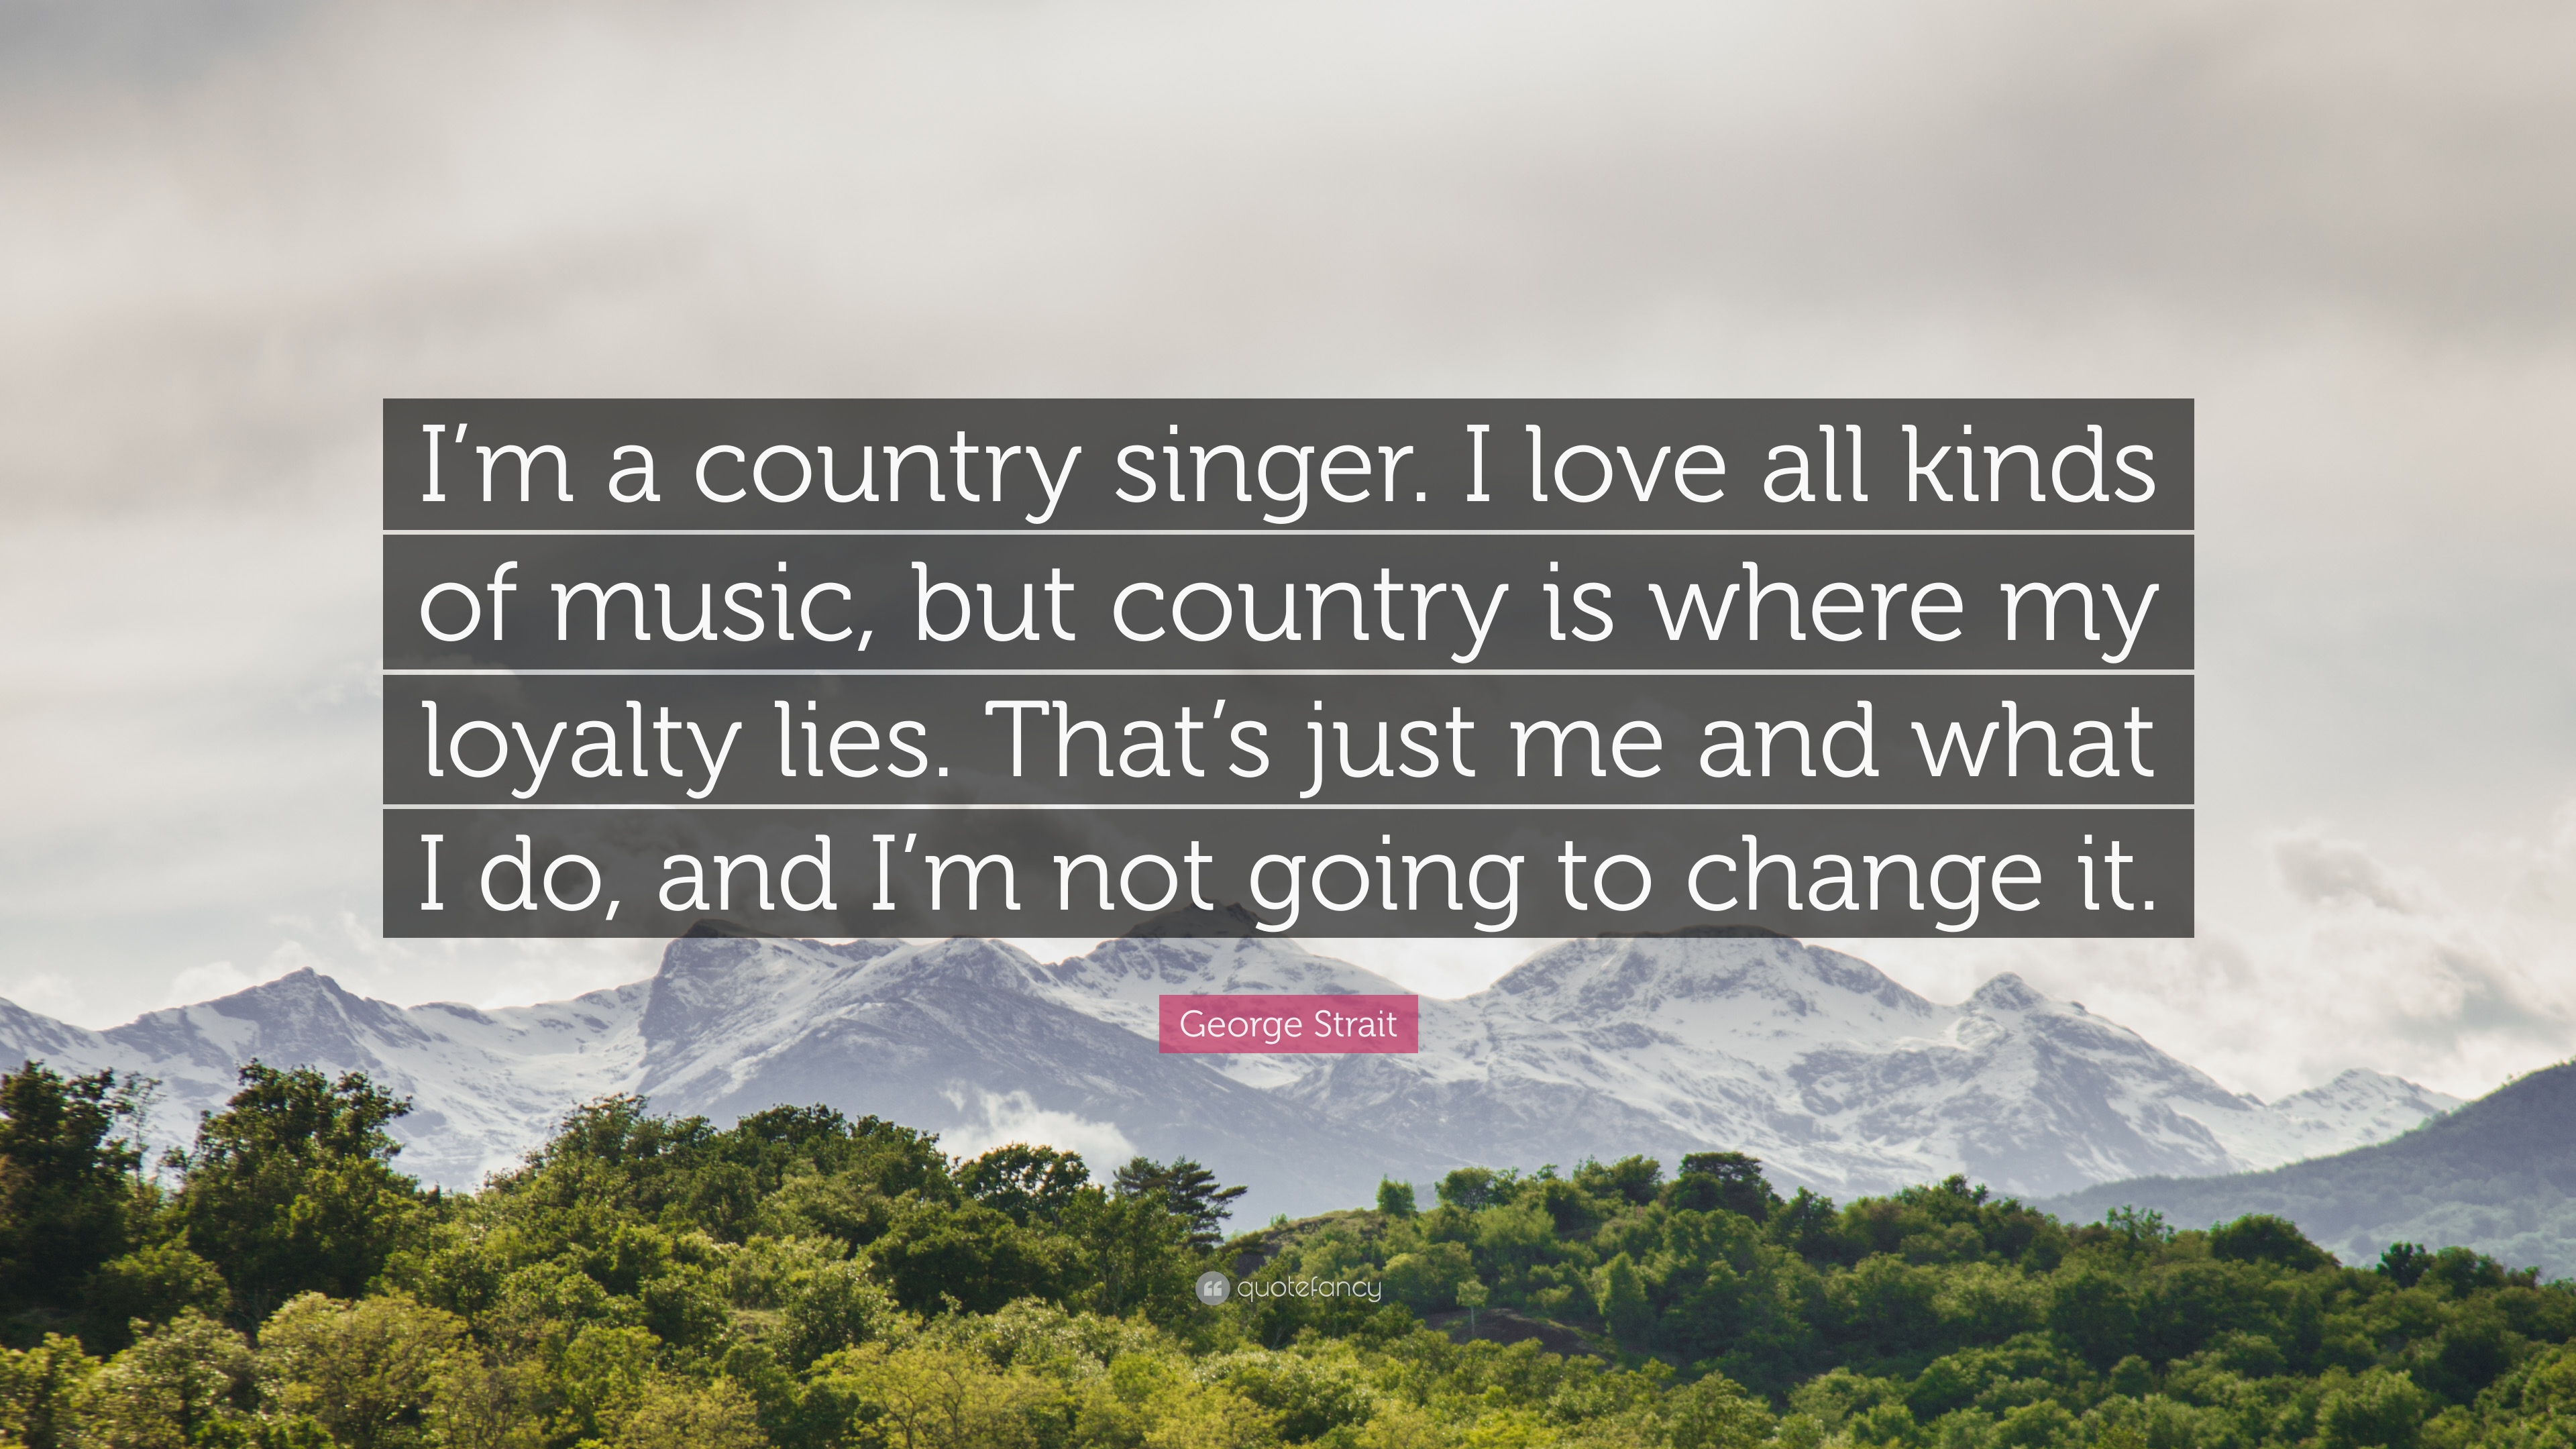 George Strait Quote: “I'm a country singer. I love all kinds of music, but country is where my loyalty lies. That's just me and what I do, and.”